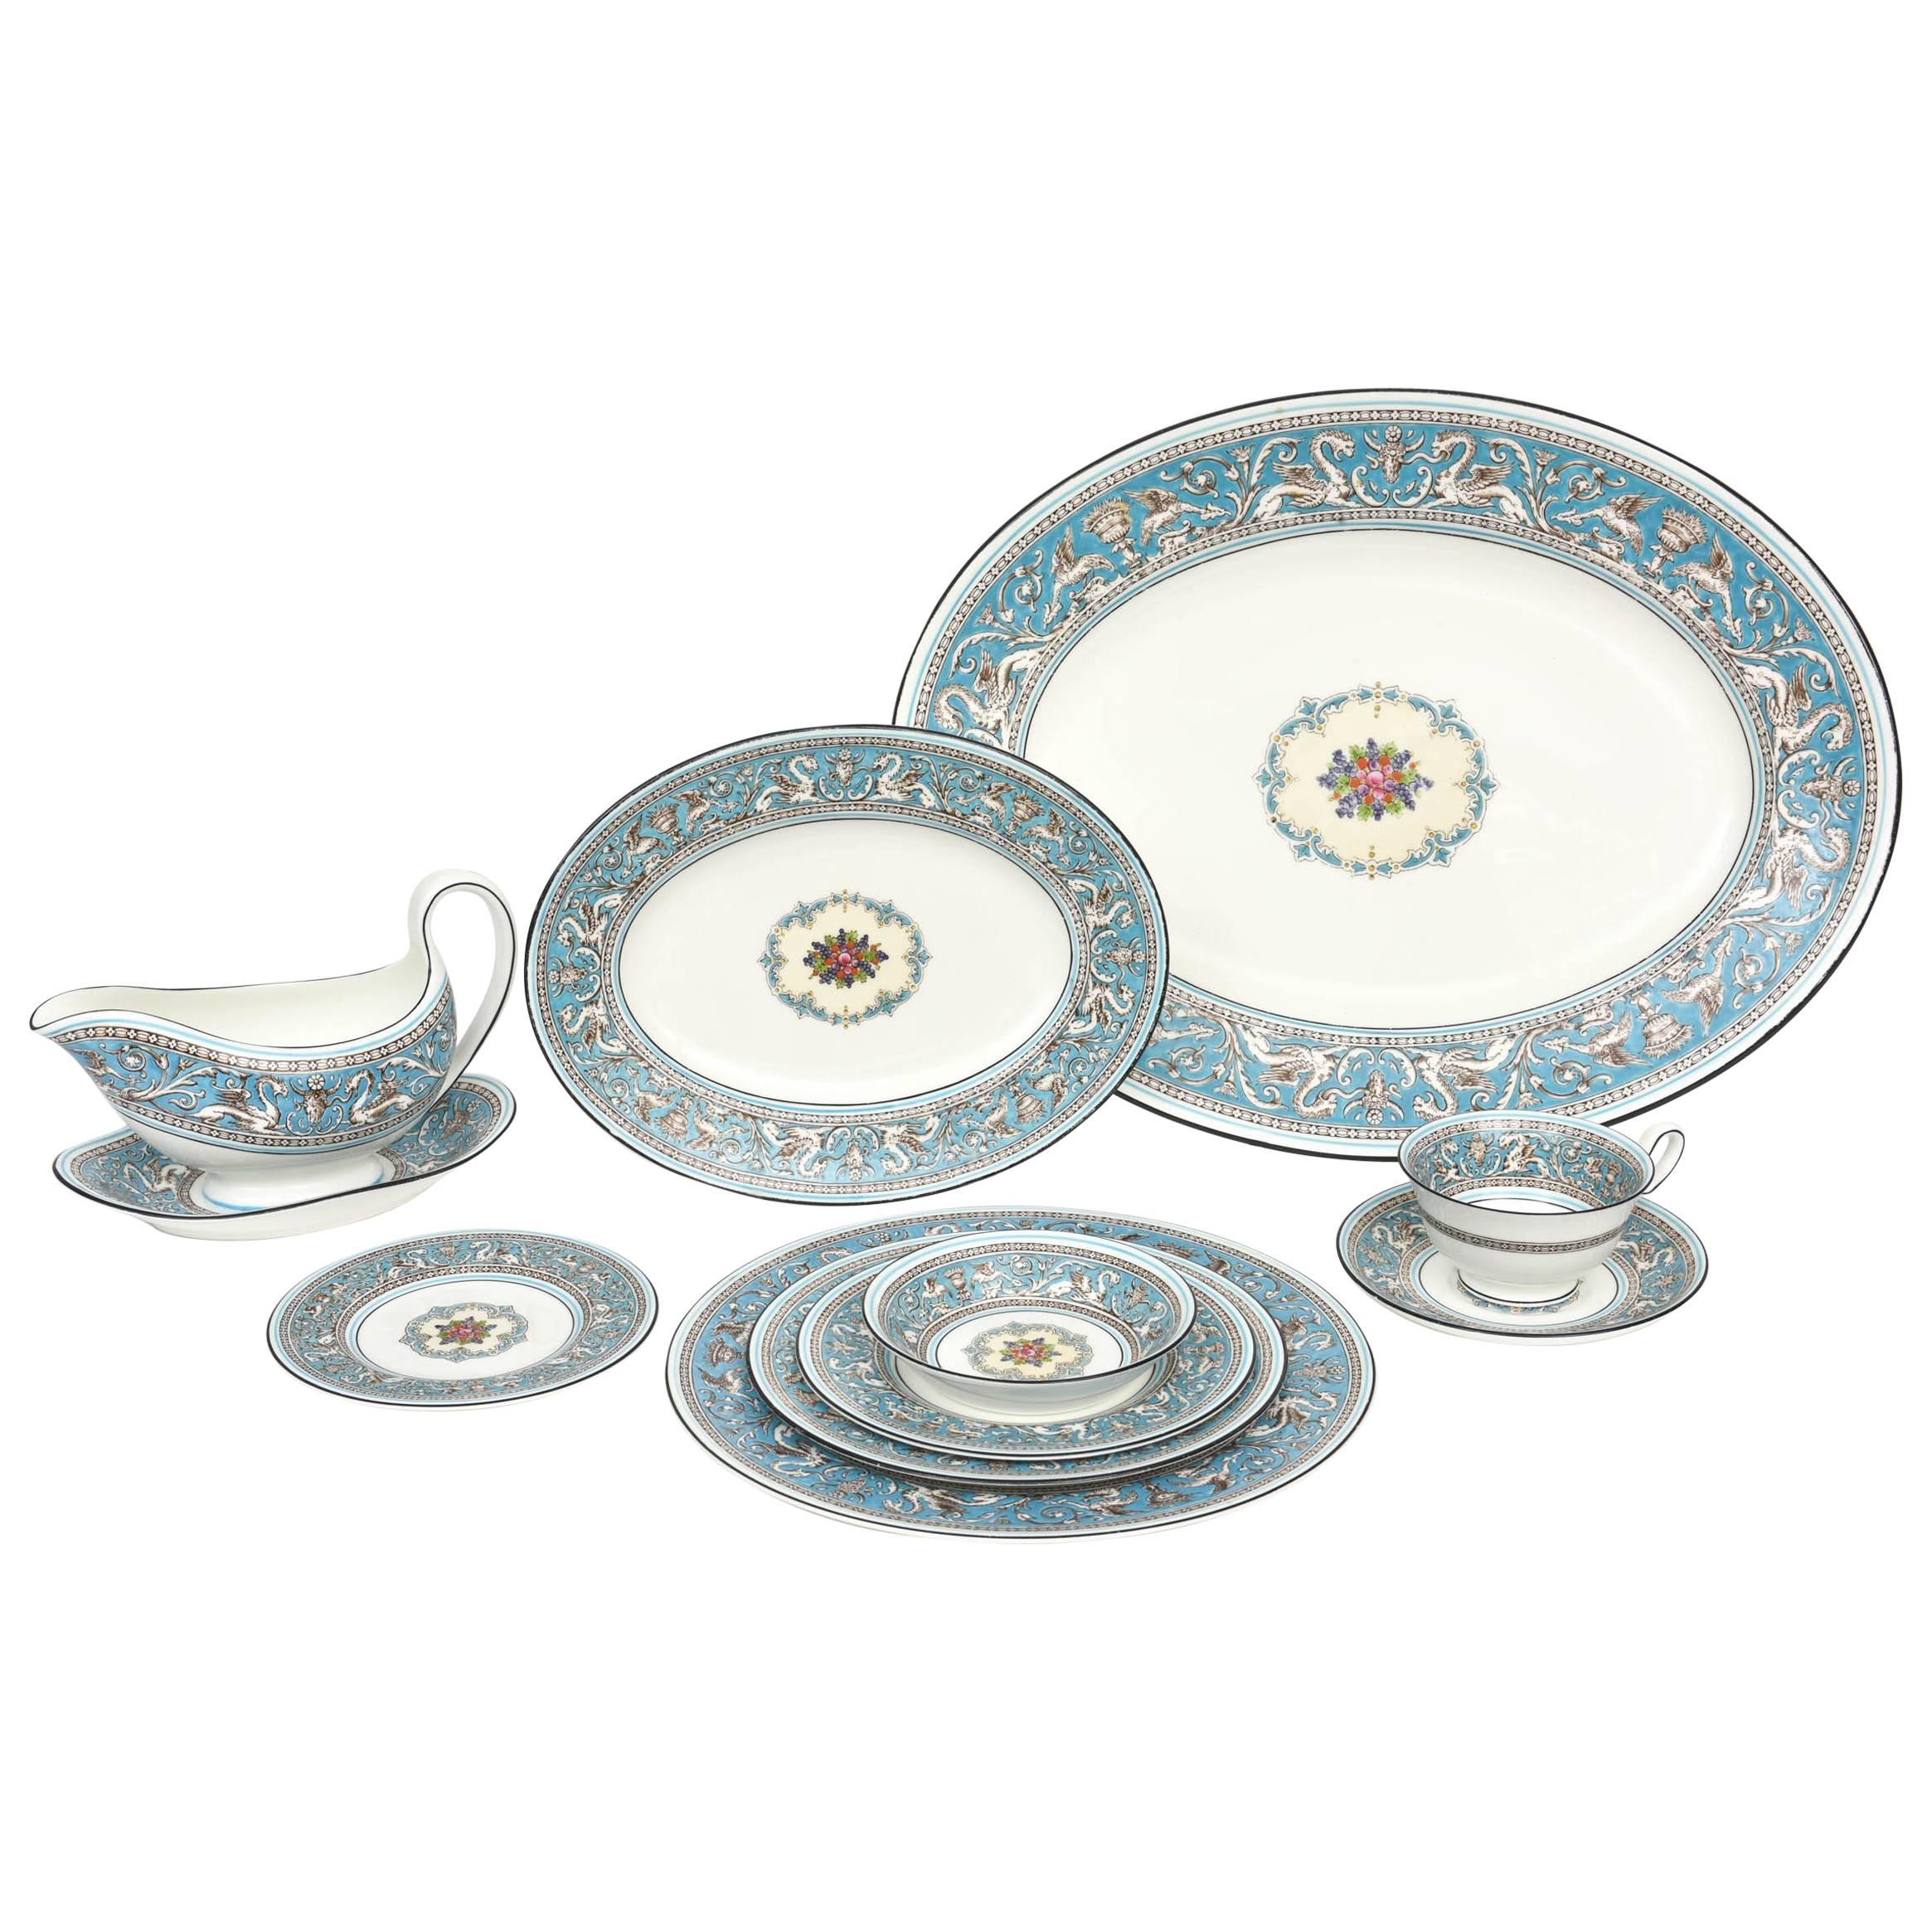 Wedgwood Turquoise China Dinner Service for 12, 92 Pieces Total, Florentine